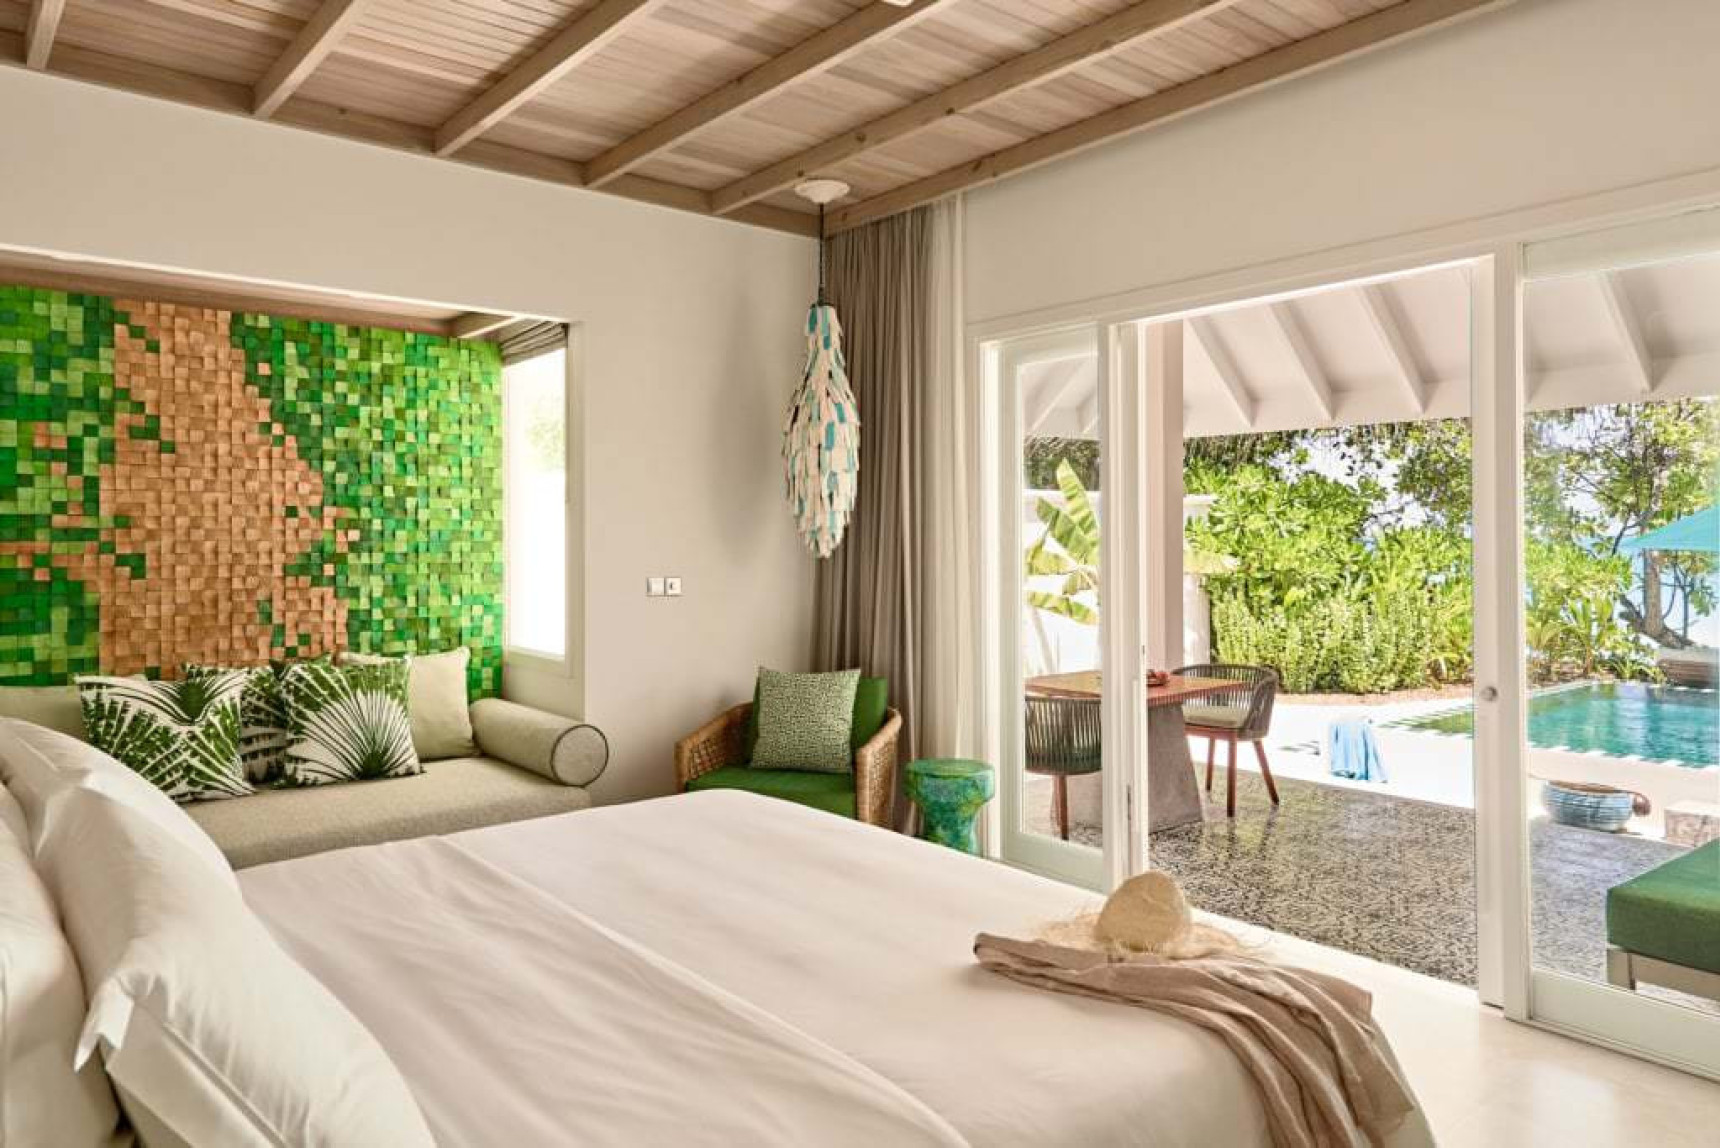 The Maldives edition – an intimate Q&A with Finolhu’s GM Marc reader inside bedroom